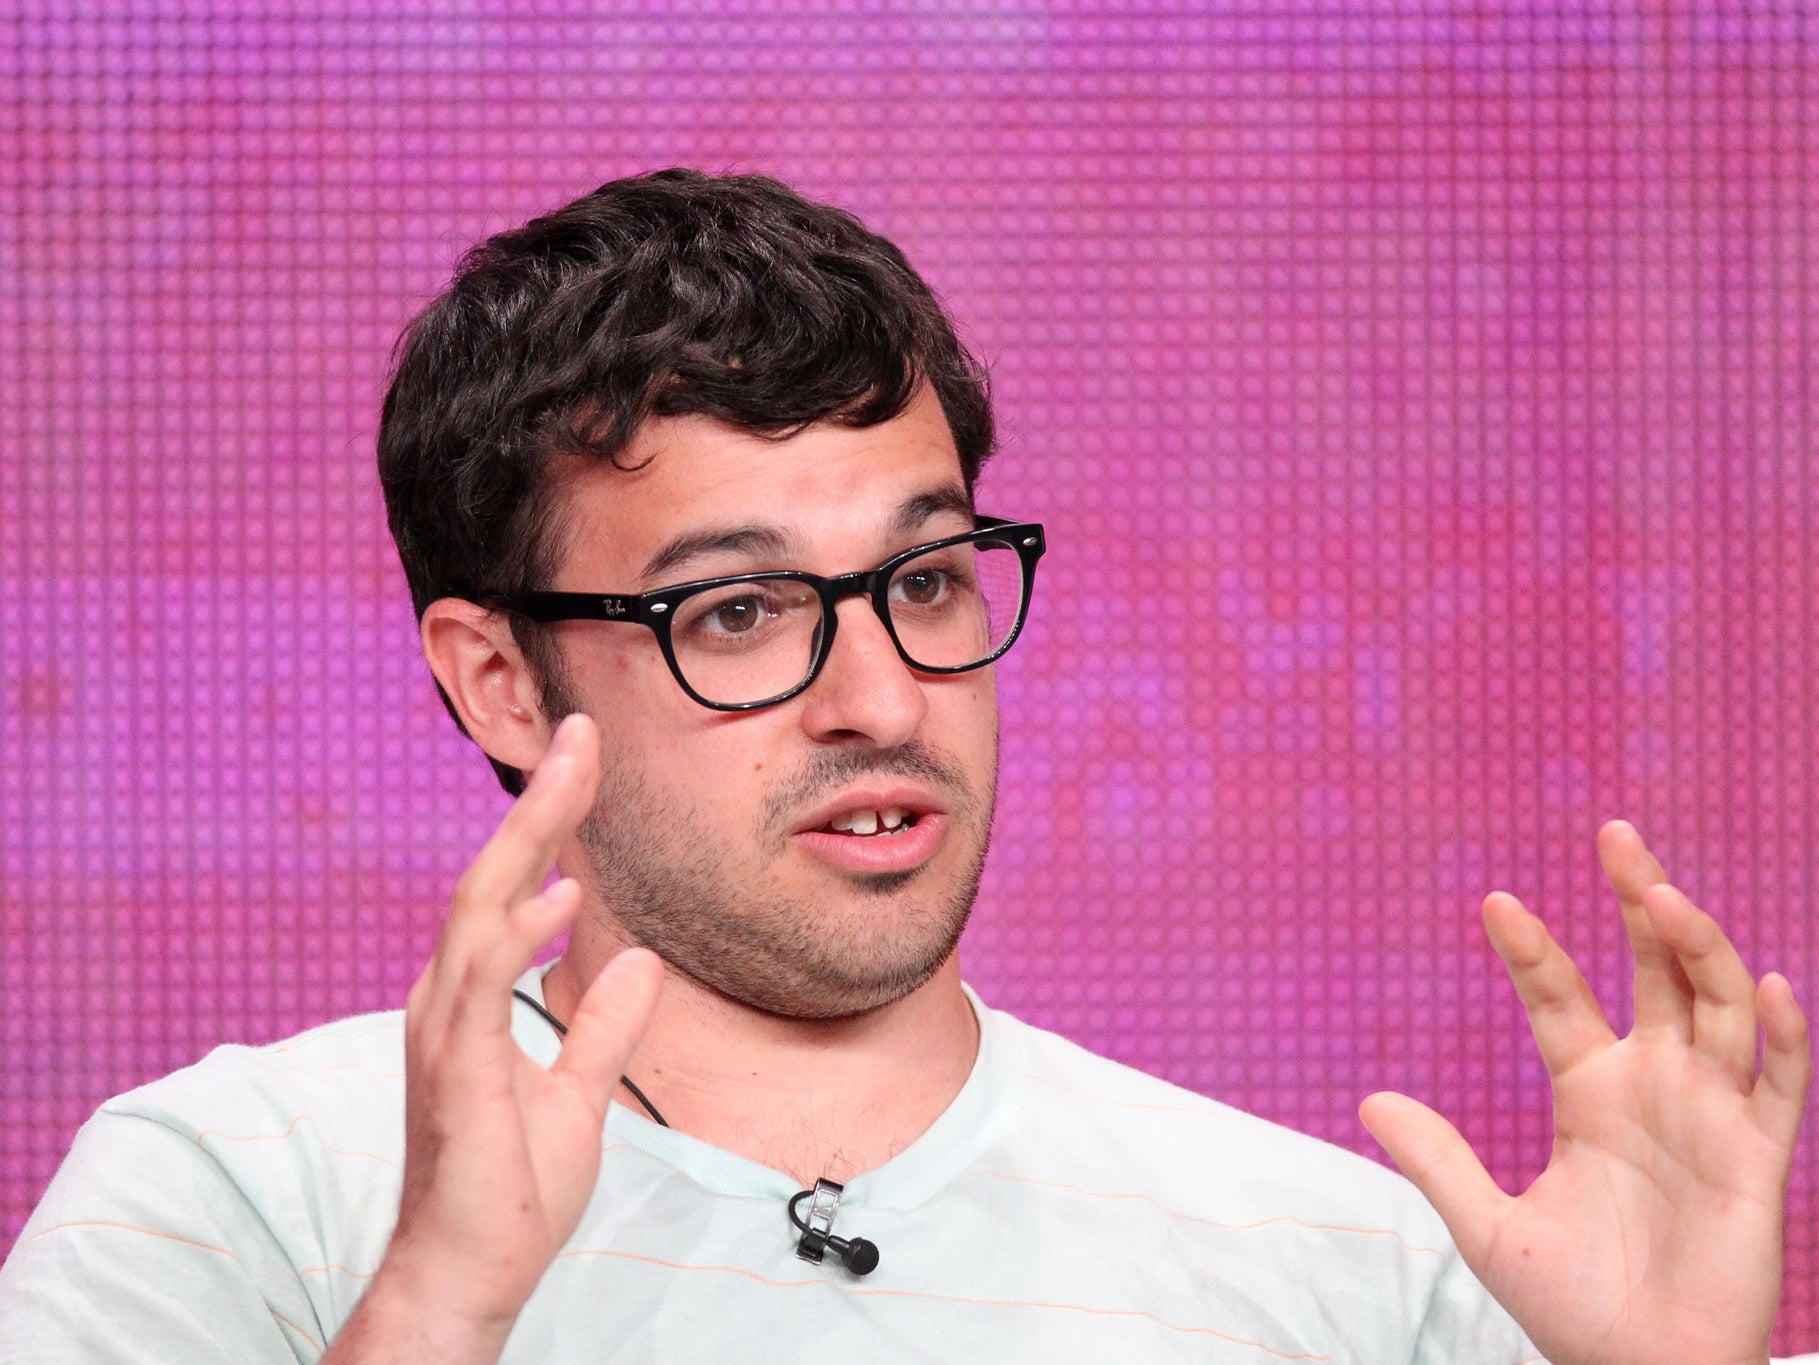 Simon Bird, who plays Will in The Inbetweeners, admits to being the most troublesome actor on set